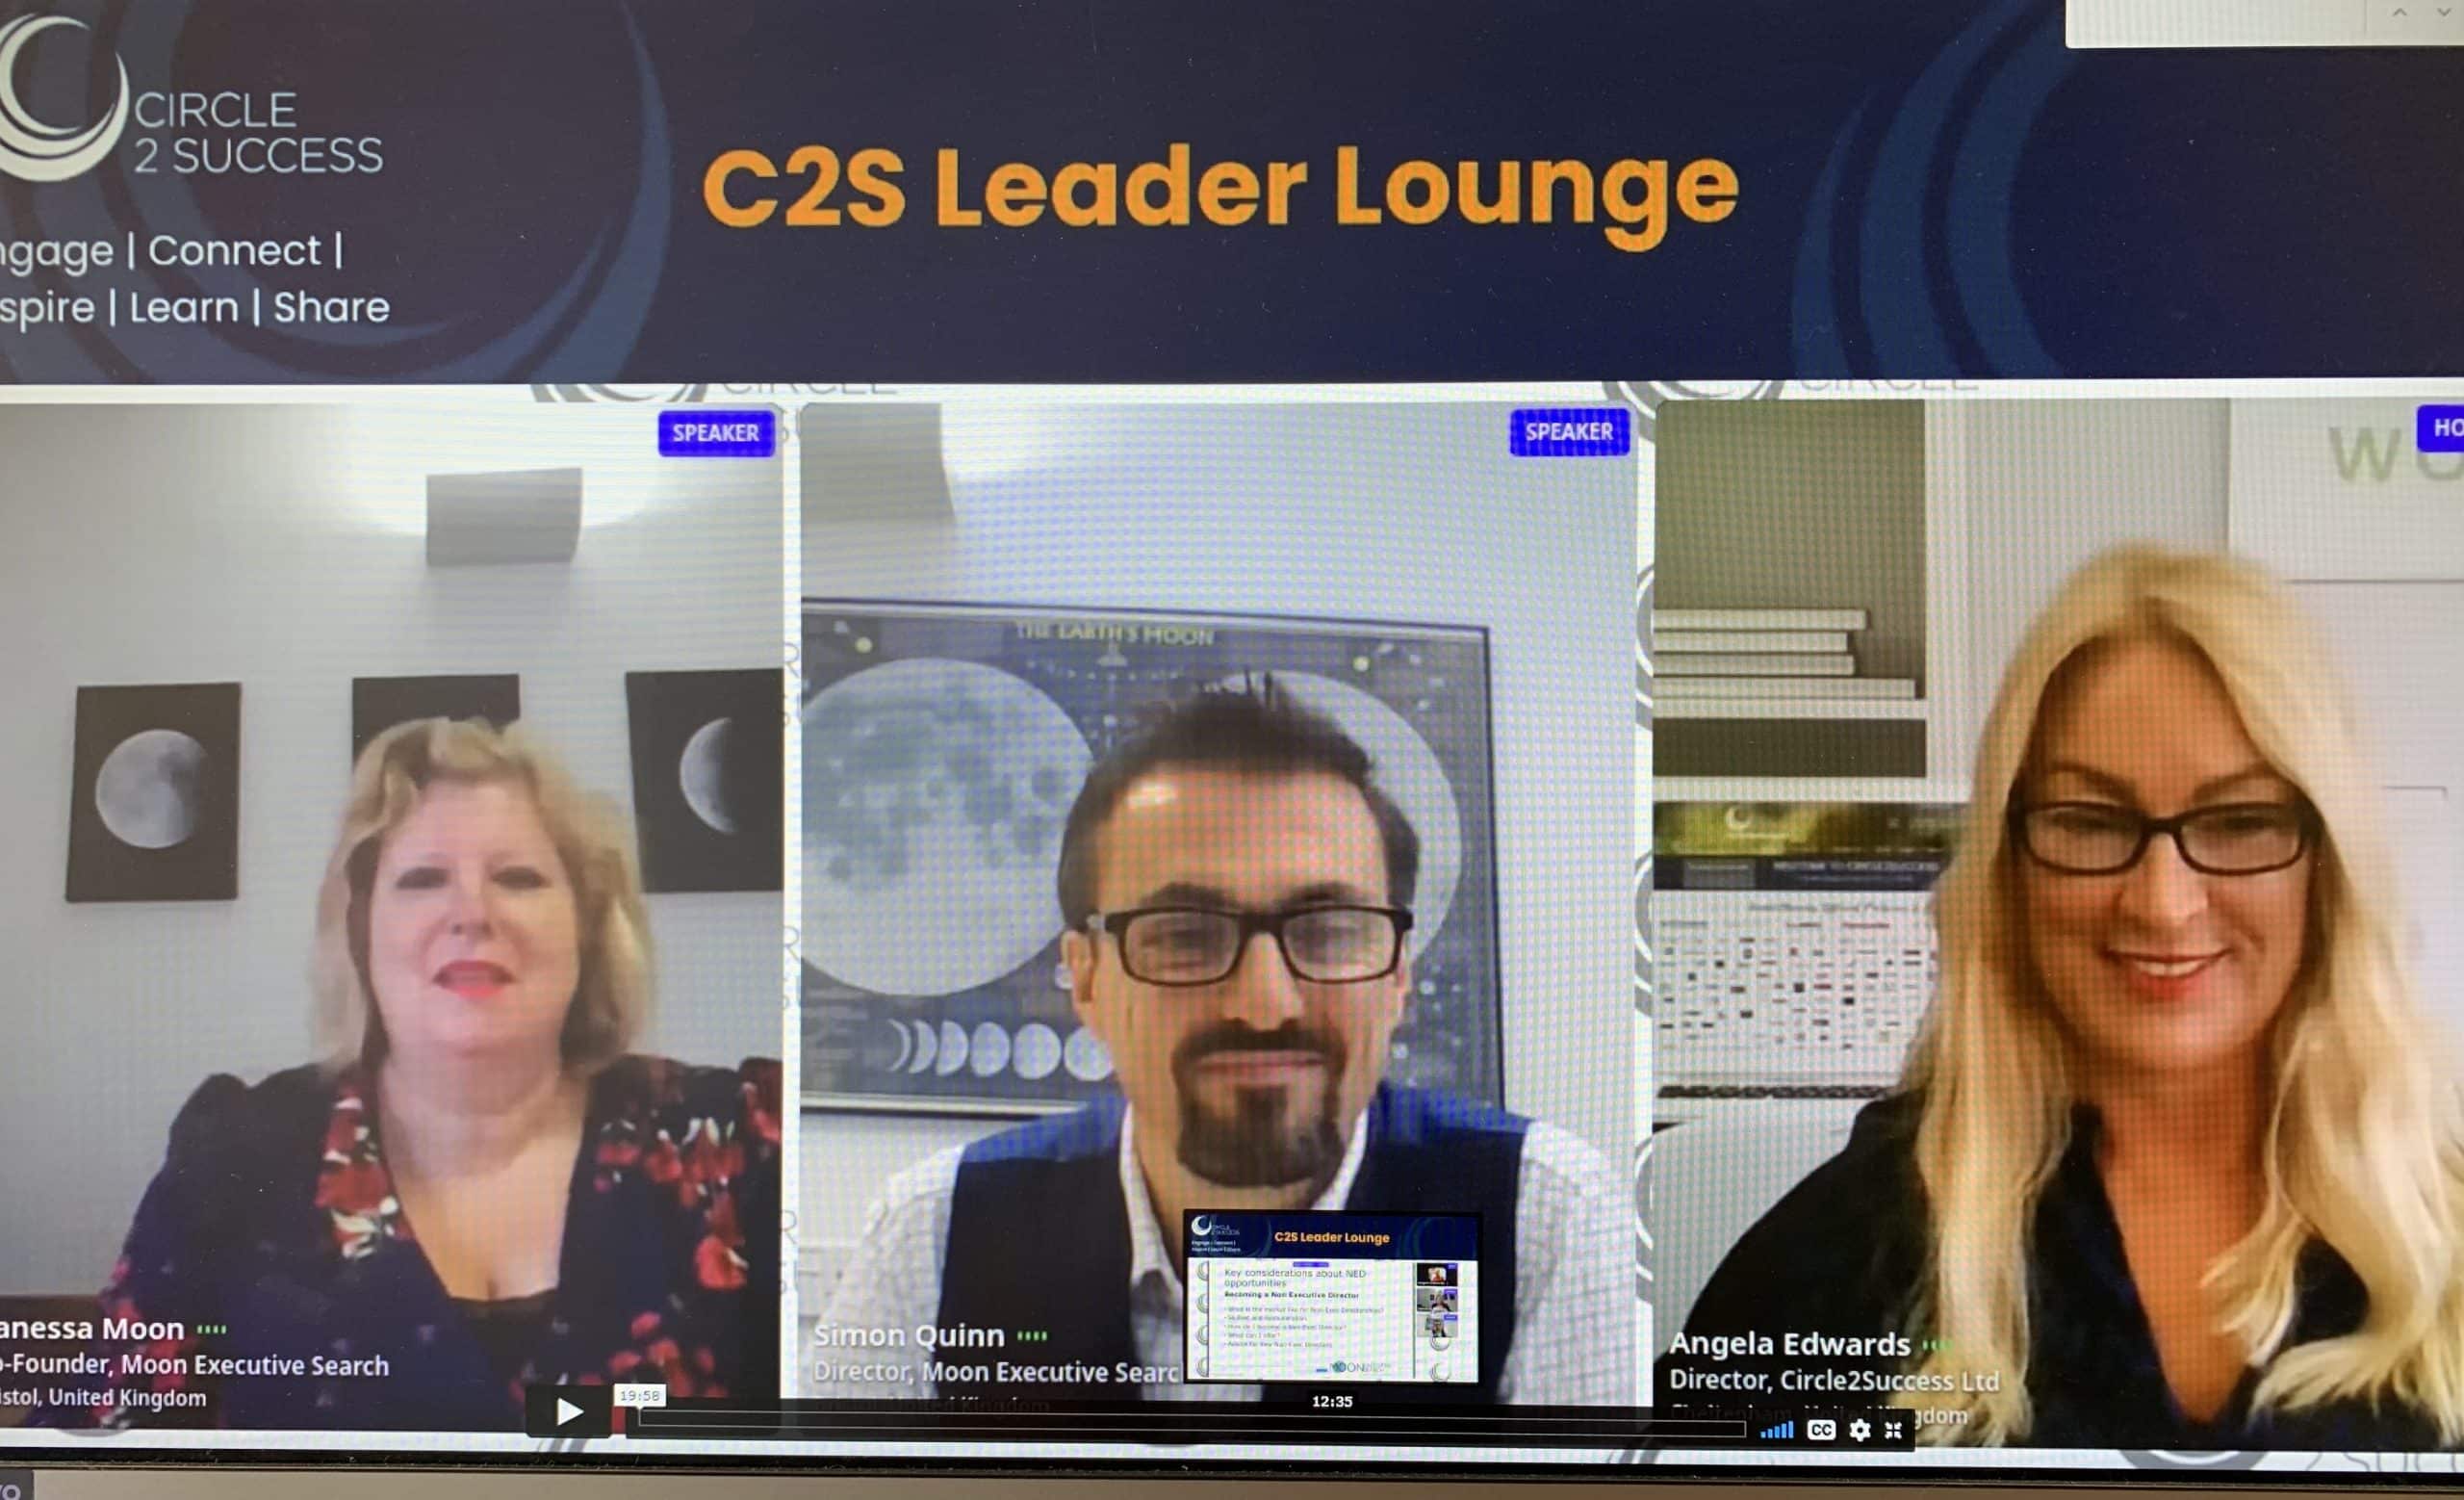 C2S Monthly Leaders Lounge Online with Leader Insighth from Moon Executive Search on NED’s